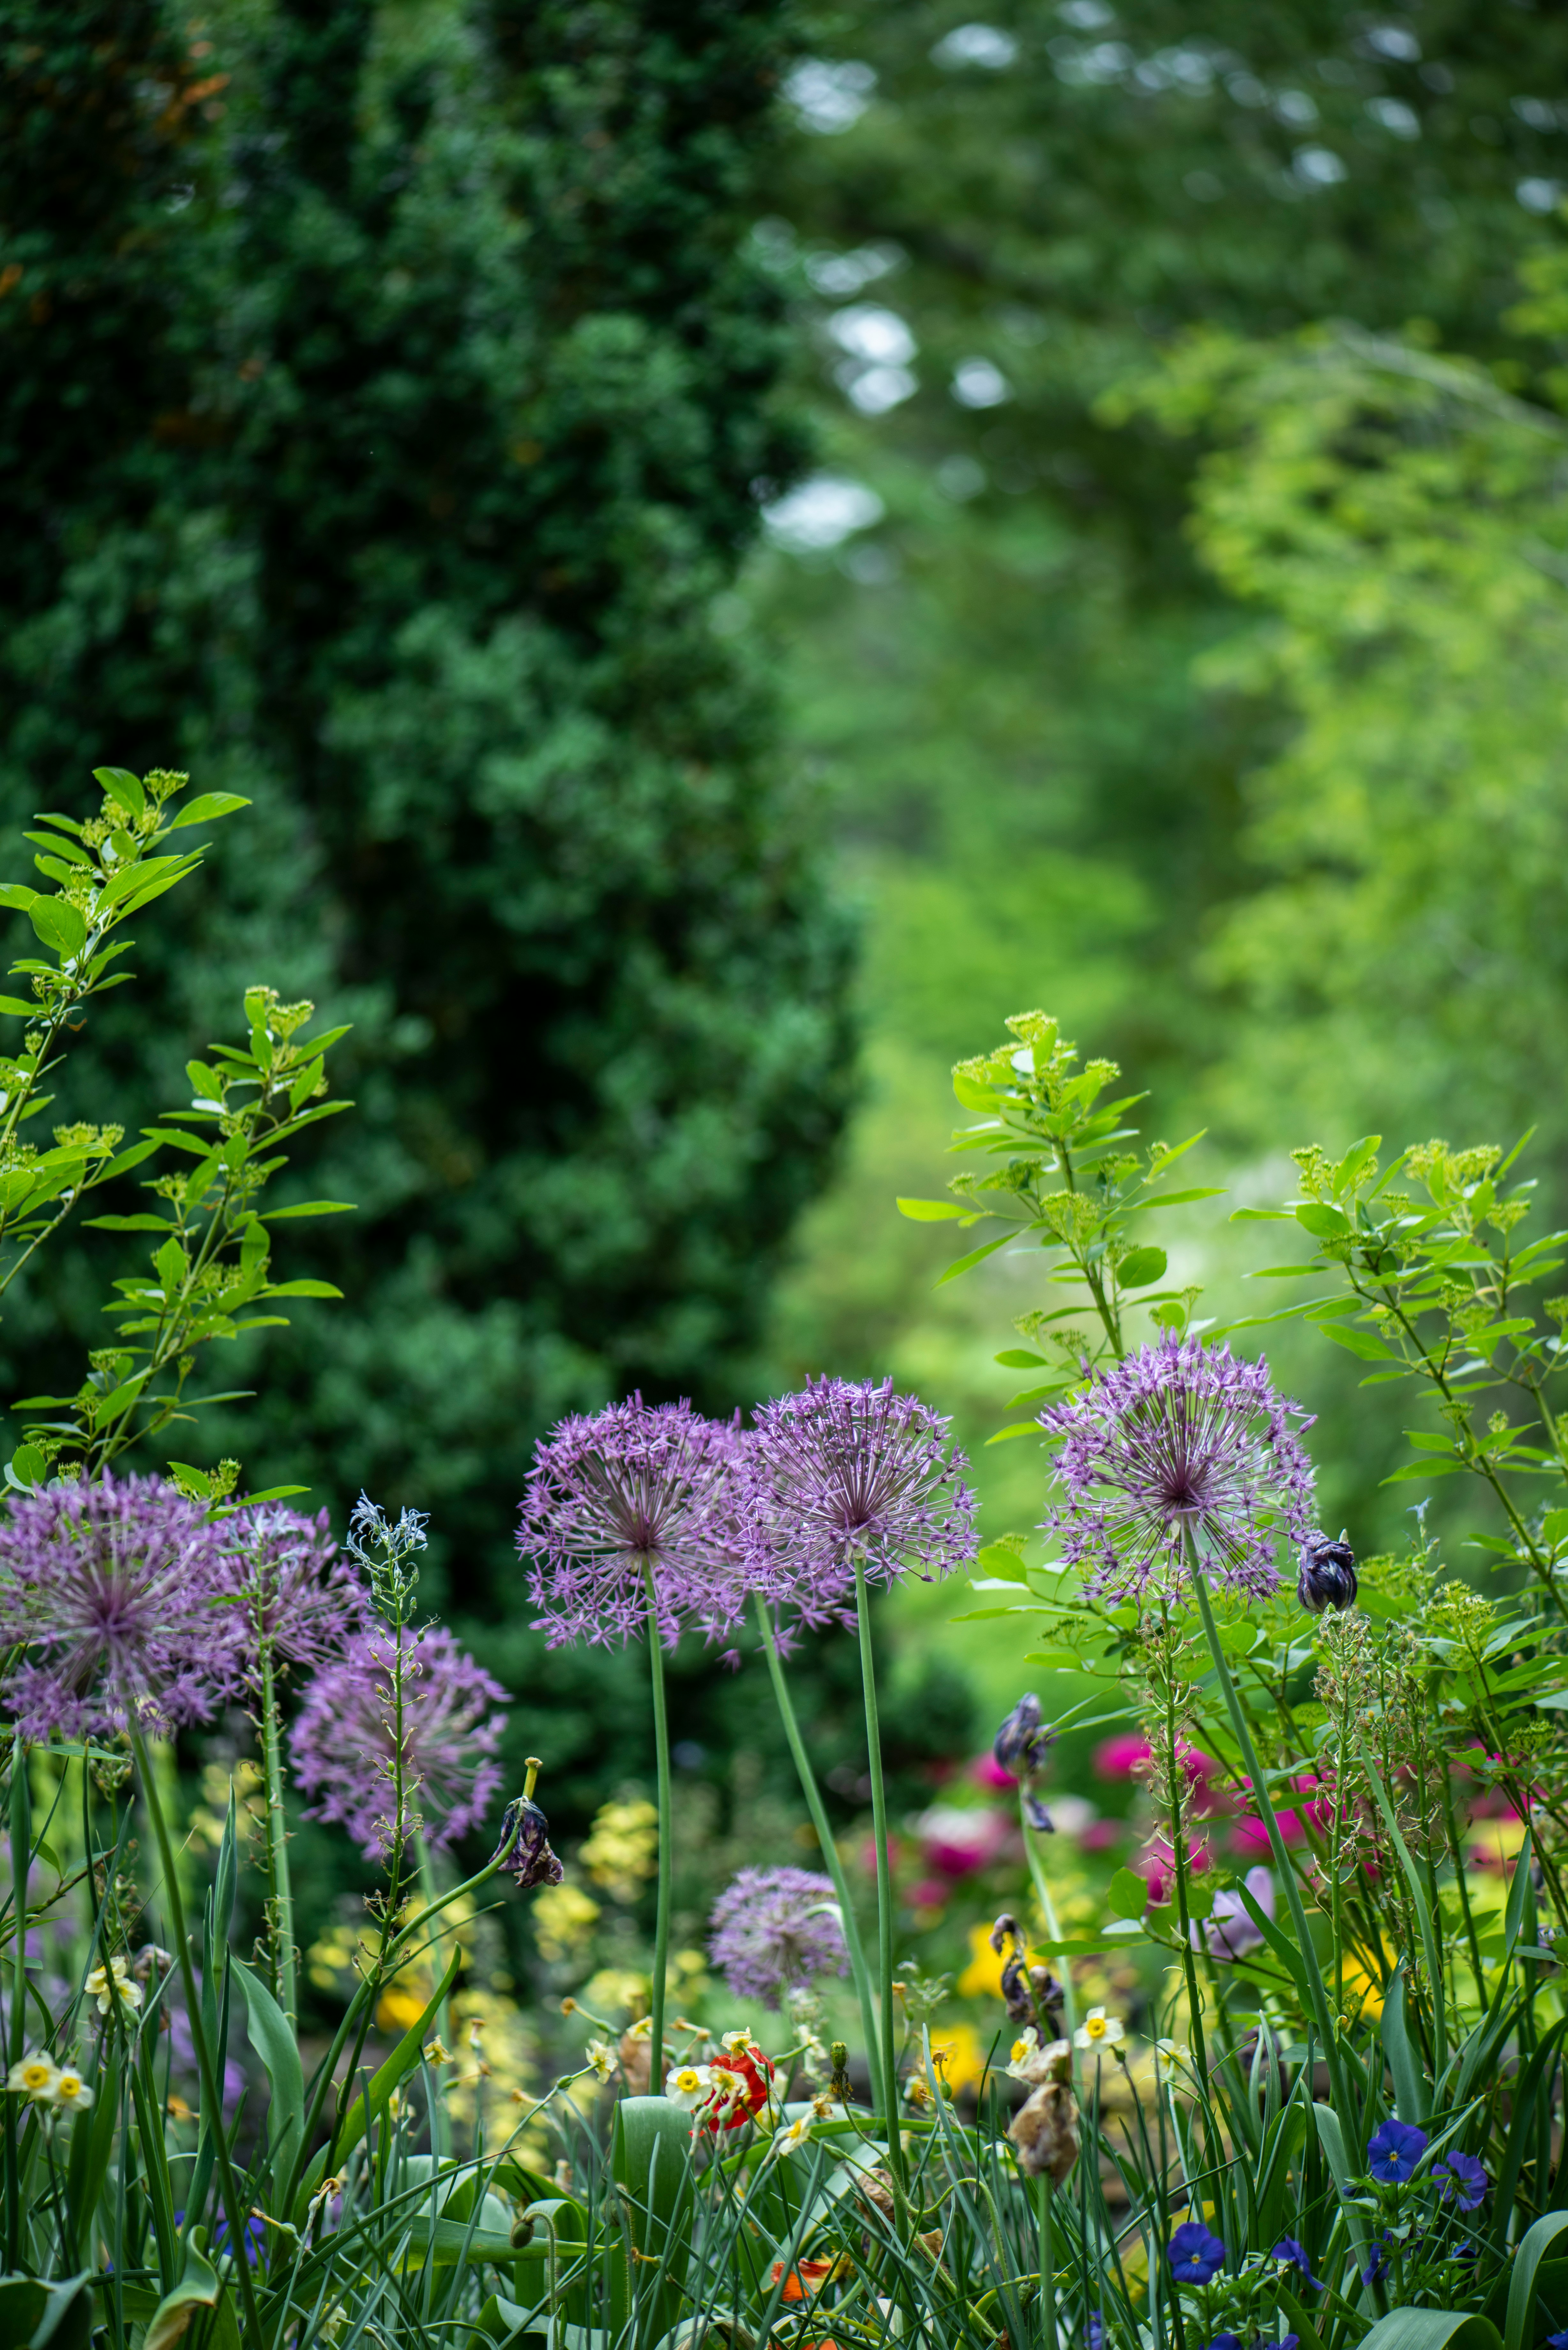 image of plants in bloom including alliums.